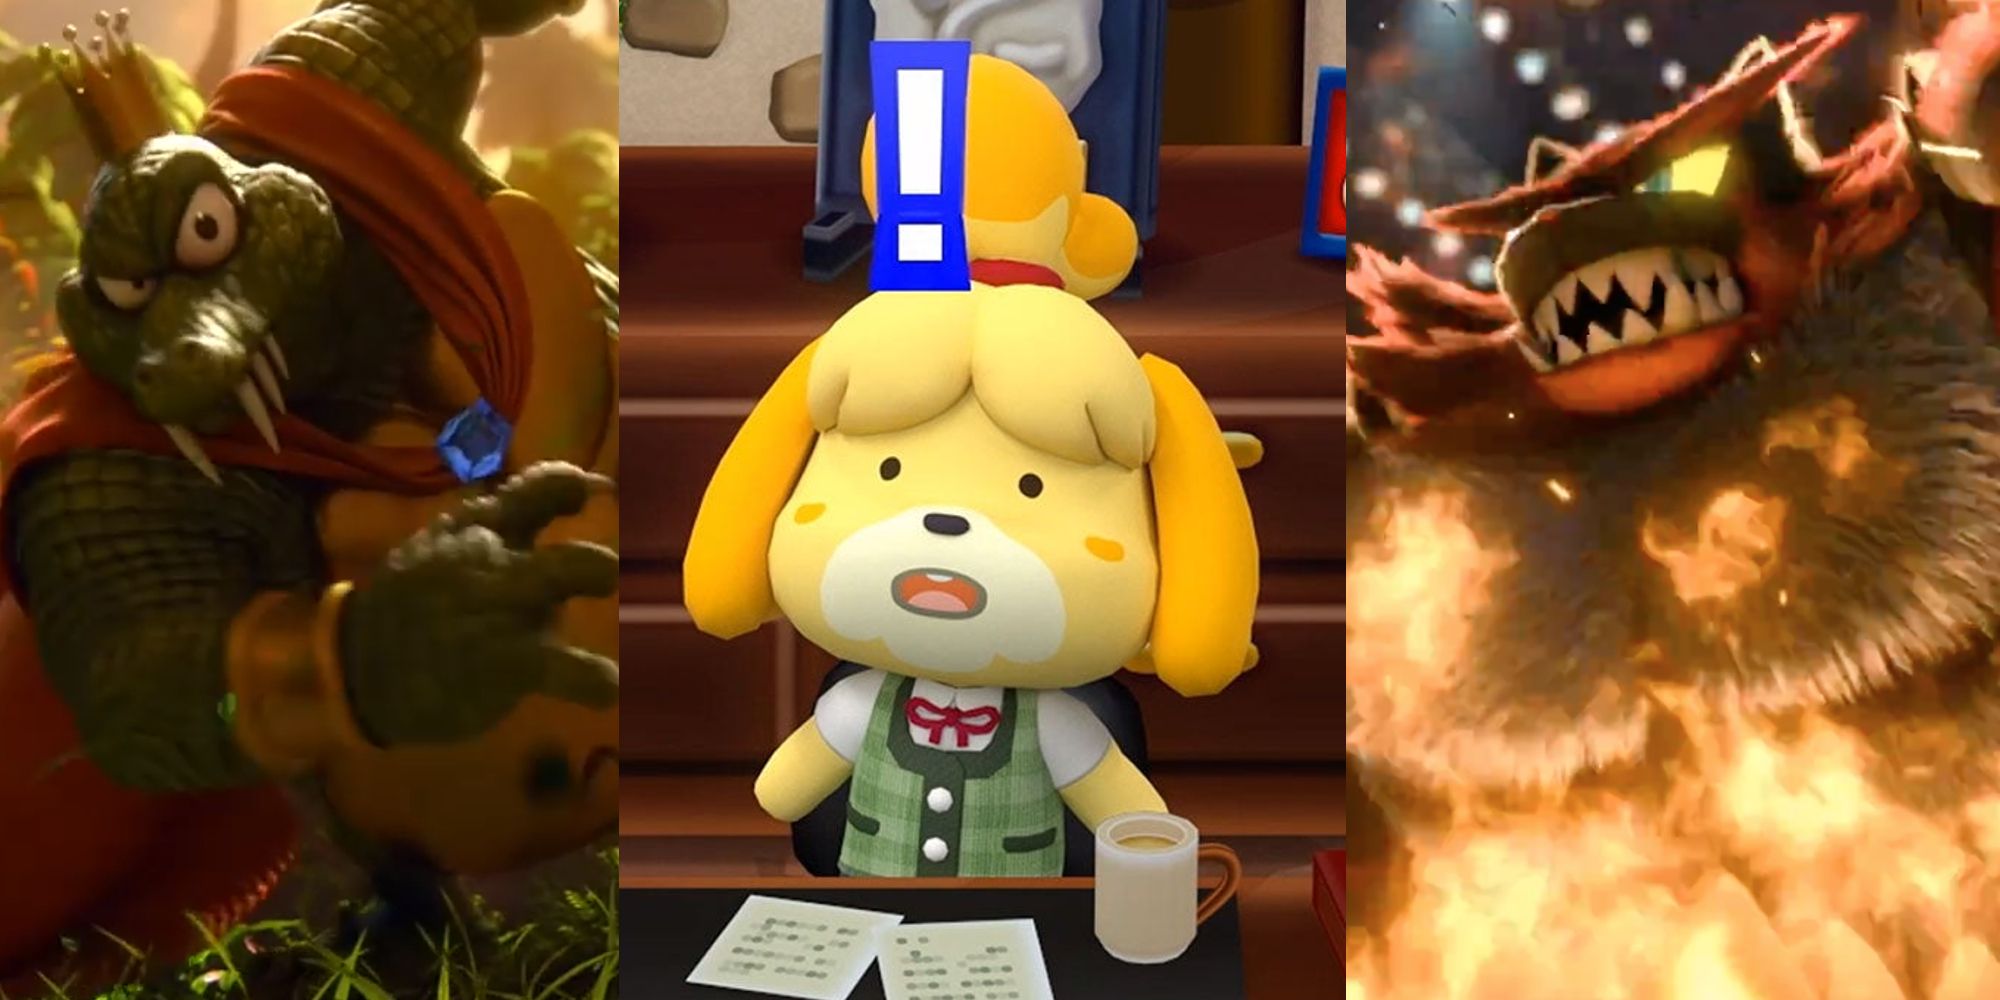 King K. Rool in a forest at sundown; Isabelle in her office with an exclamation mark over her; Incineroar surrounded by flames in an arena